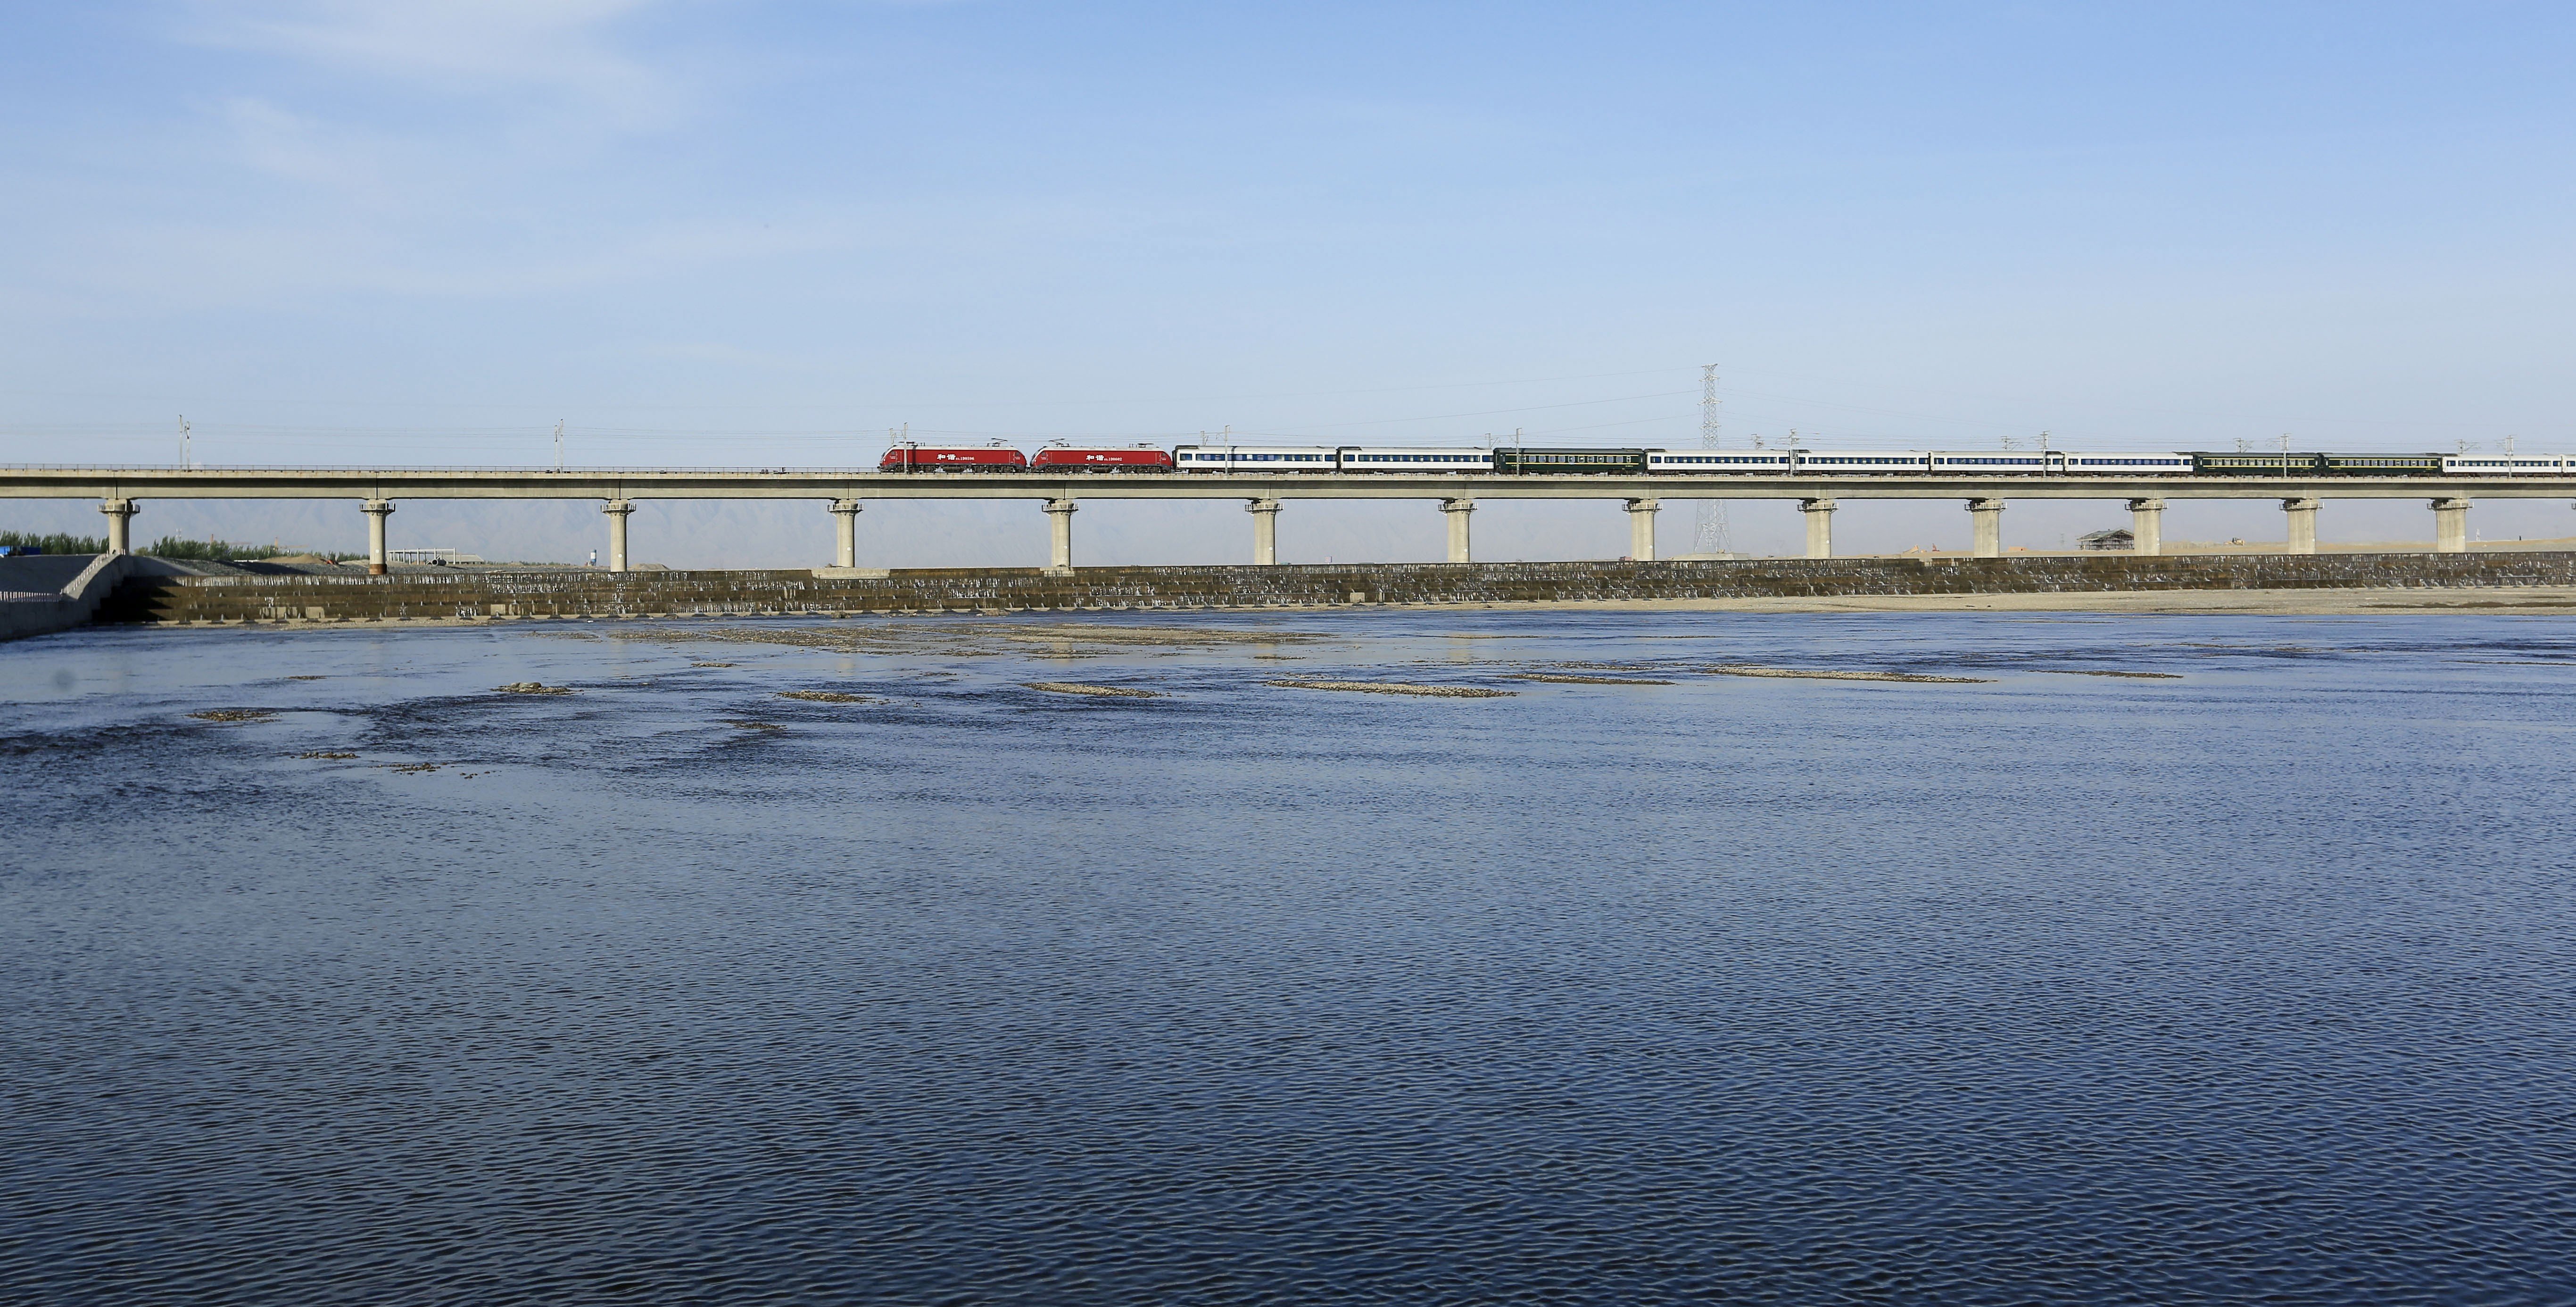 A train along the Heihe Bridge of the Lanxin High-speed Railway in Zhangye City in Gansu province. The 1,776-kilometer railway linking Lanzhou, capital of Gansu, and Urumqi, capital of Xinjiang, is one of the major passages for China's Belt and Road Initiative. Photo: Xinhua